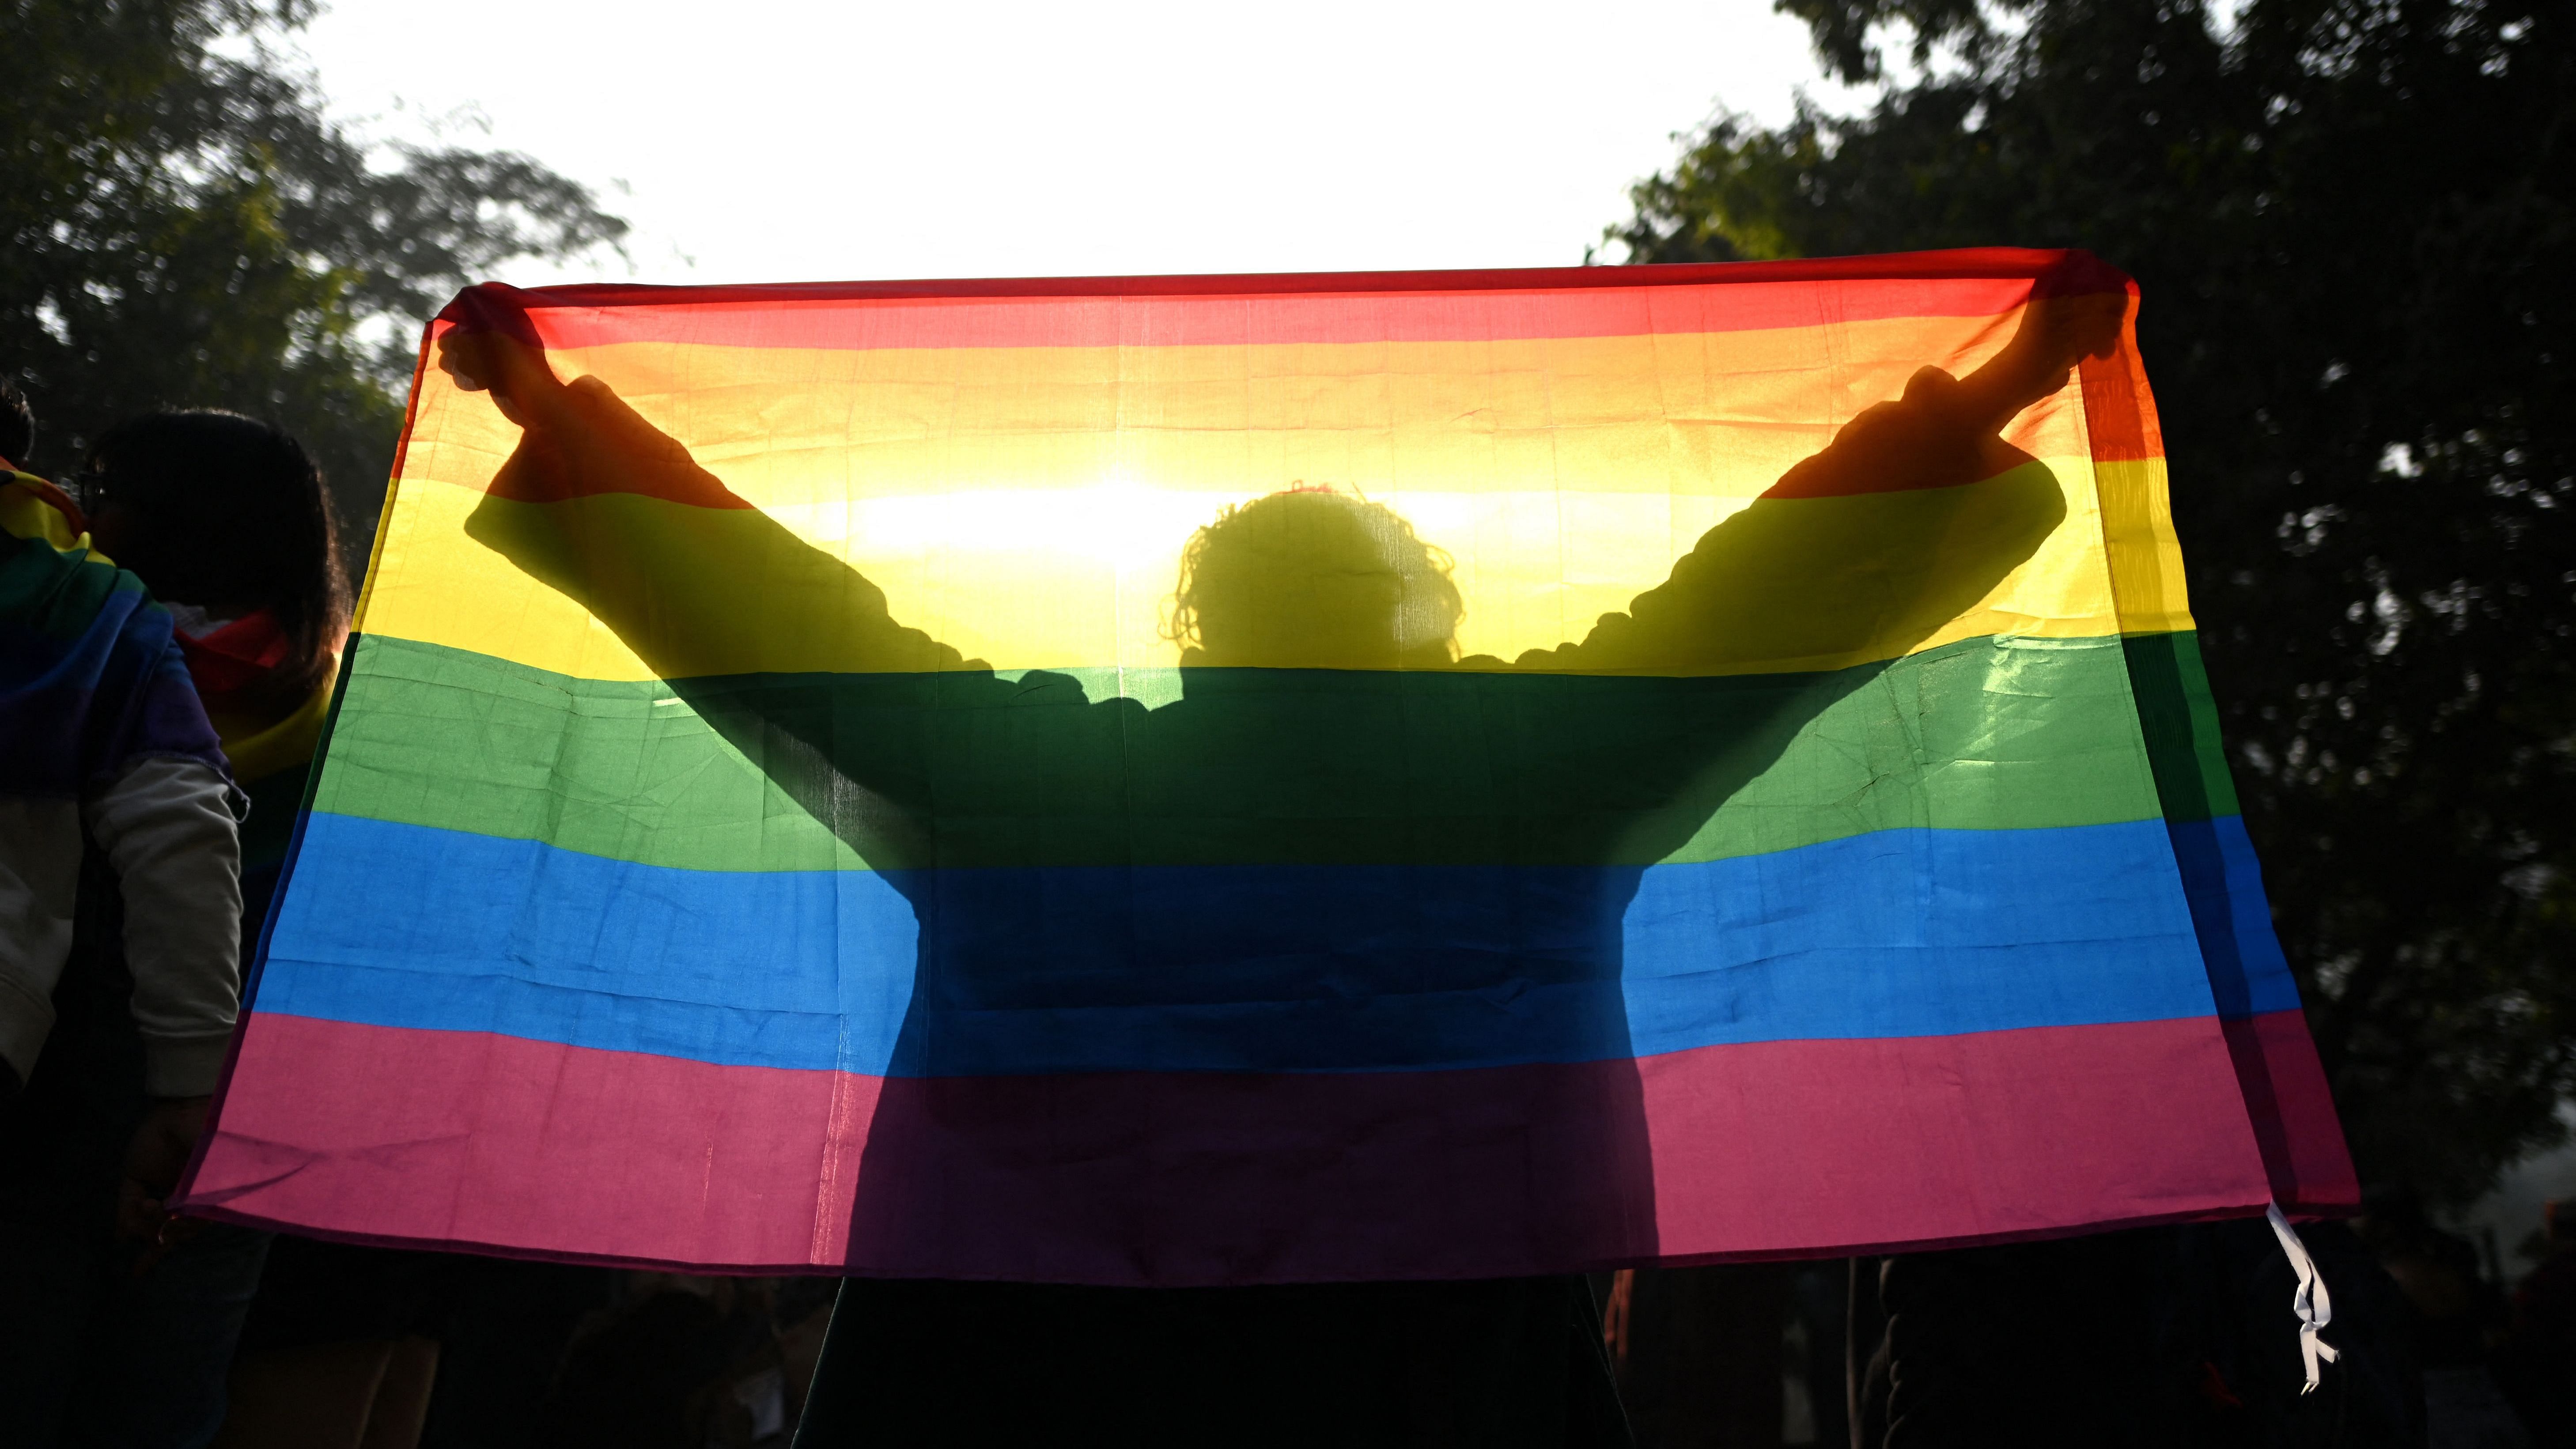 In rural parts of the country though, where roughly two-thirds of the country’s population lives, being gay can still be considered taboo. They still face societal discrimination, being shunned by the community and their family, and harassment or violence, sometimes even at the hands of the police. Credit: AFP File Photo